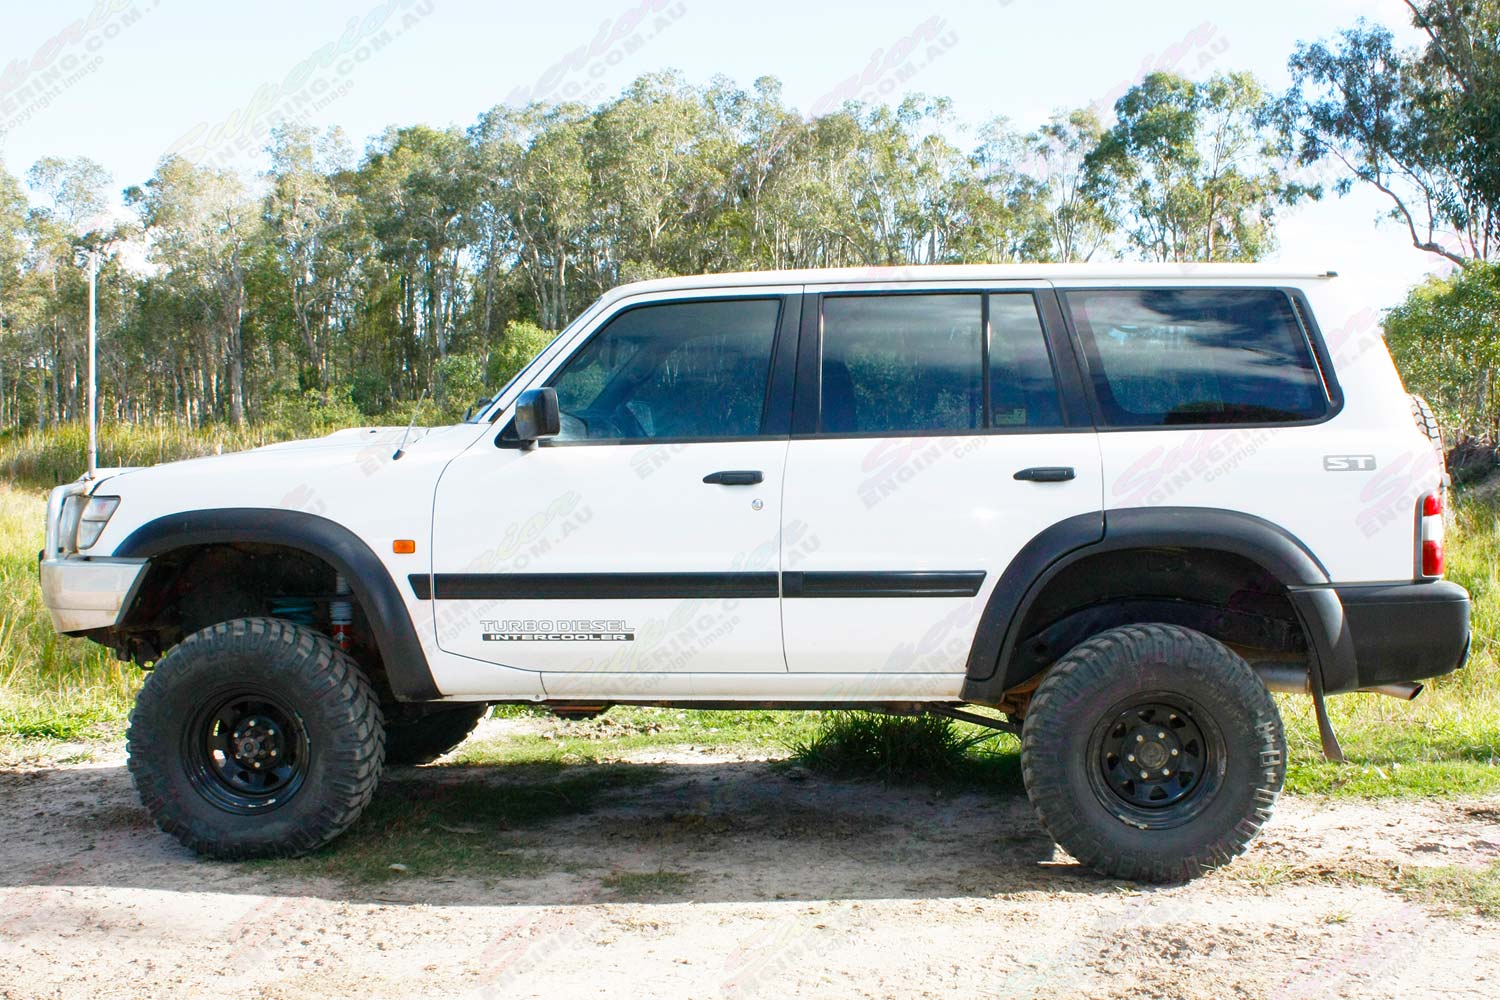 Left side view of a white GU Nissan Patrol wagon after being fitted with a 5 inch EFS Extreme lift kit